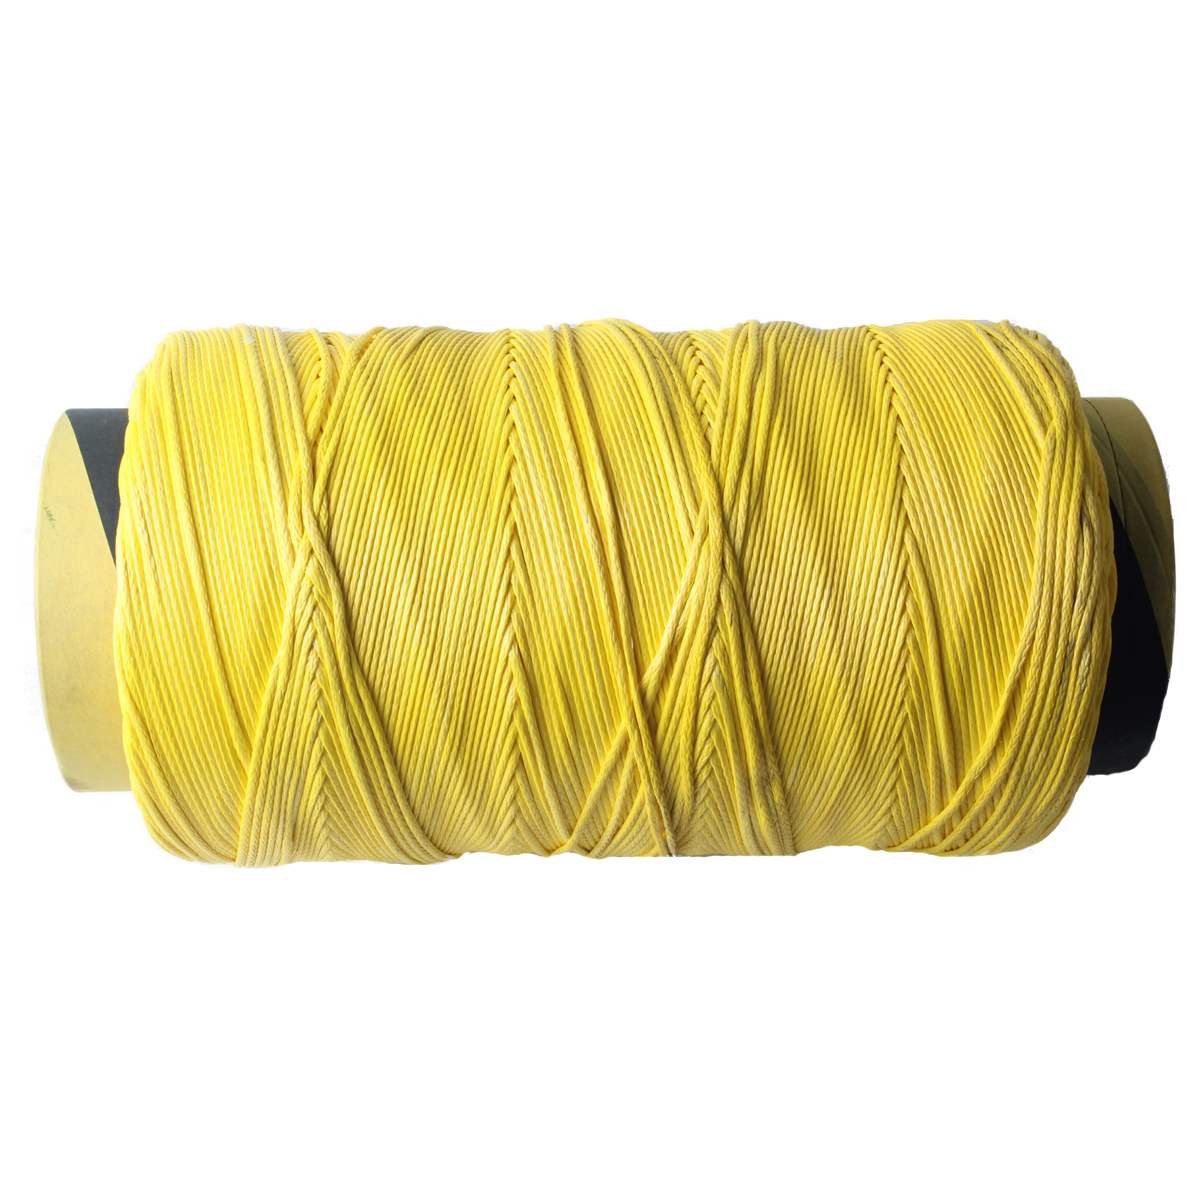 12strands braided vectran rope for paragliding winch